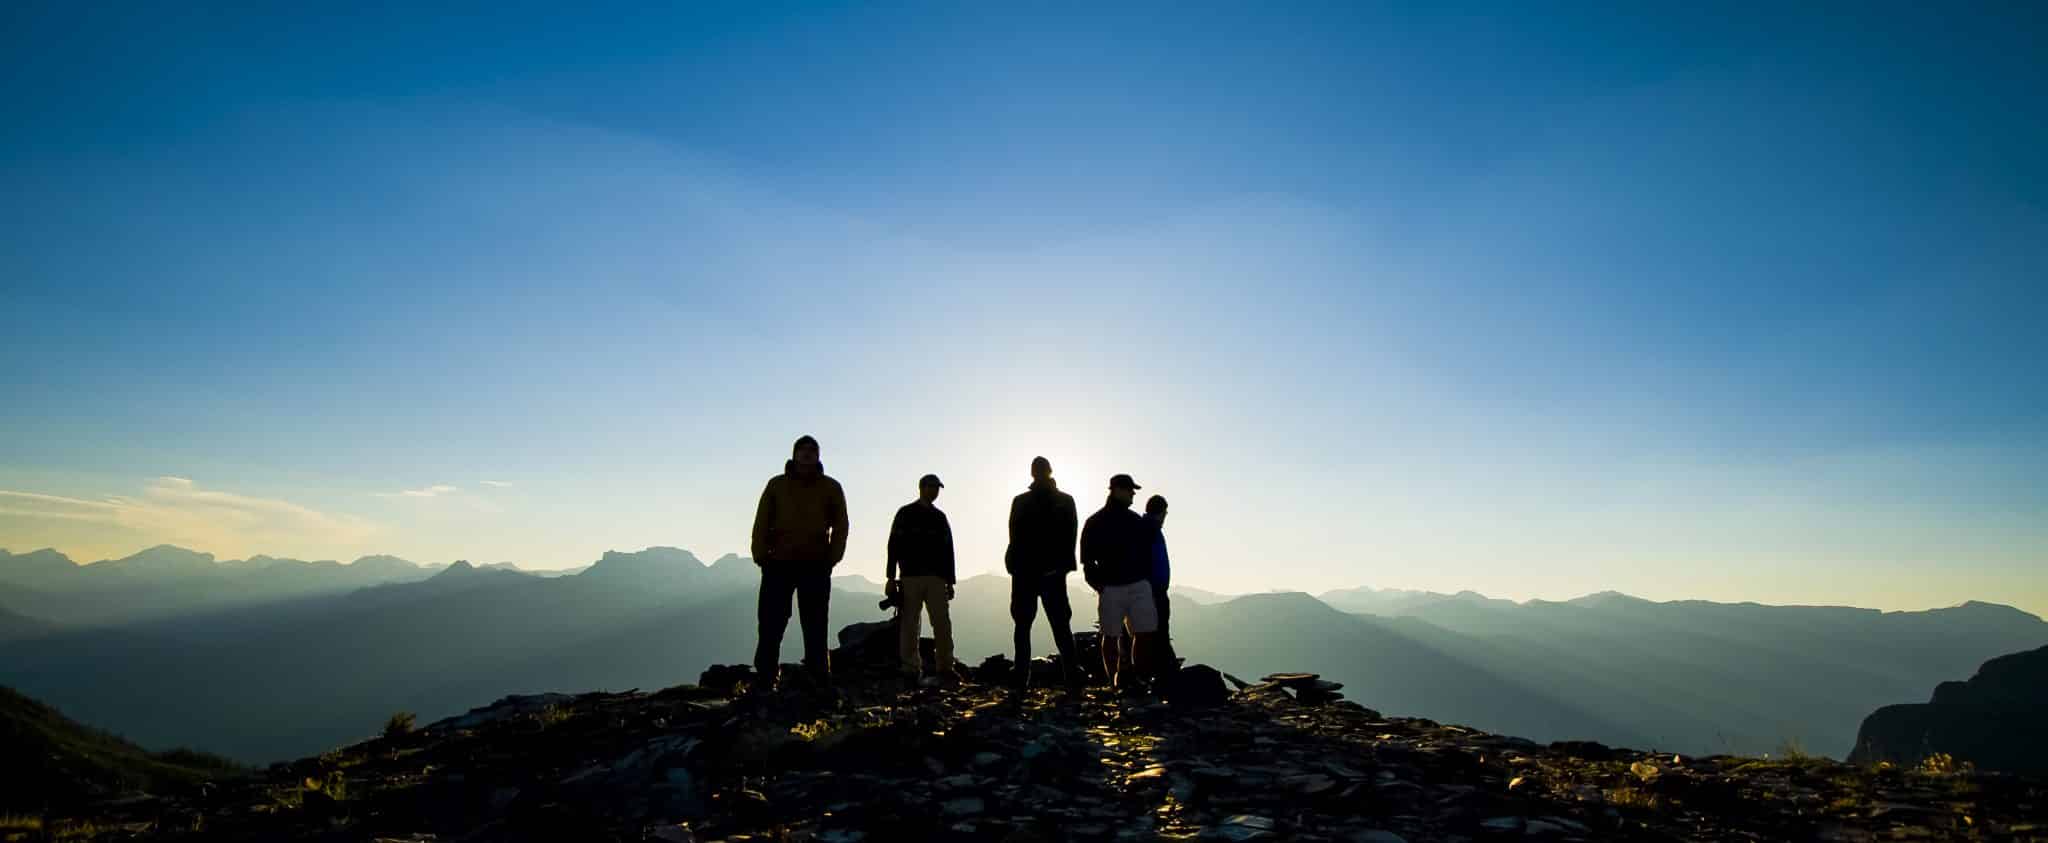 Silhouettes on Mountain at Sunrise